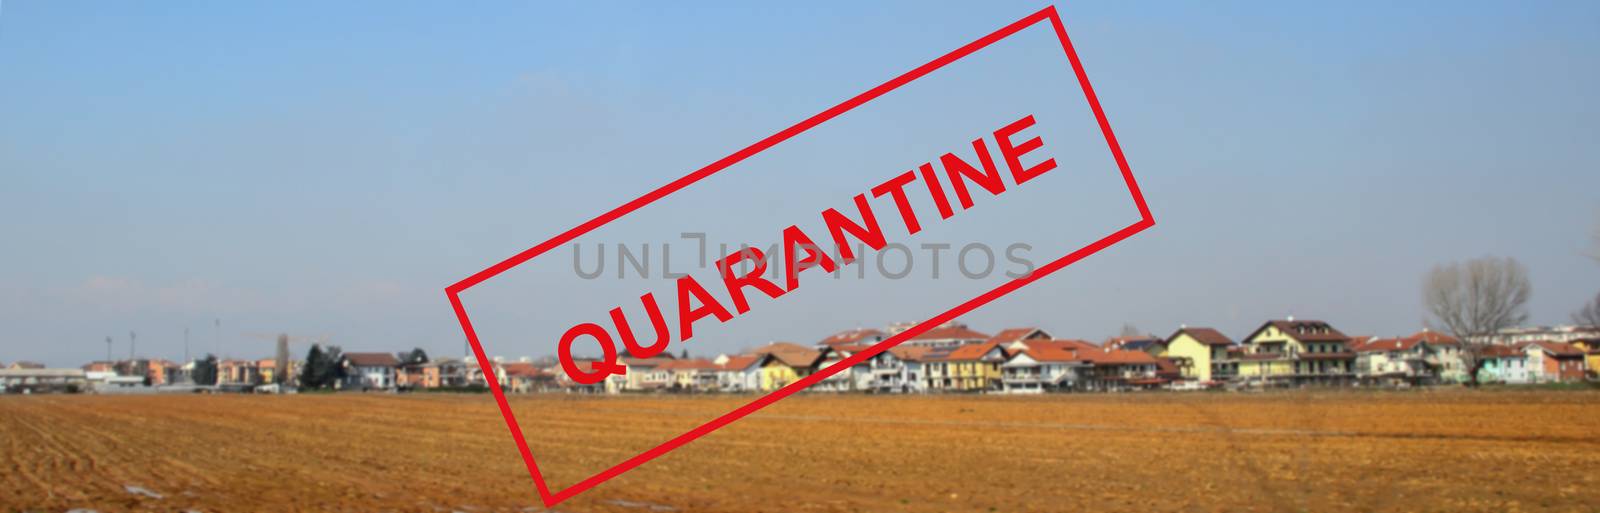 Coronavirus quarantine in Europe. Text on the background of a spring landscape in Italy near Turin. by bonilook